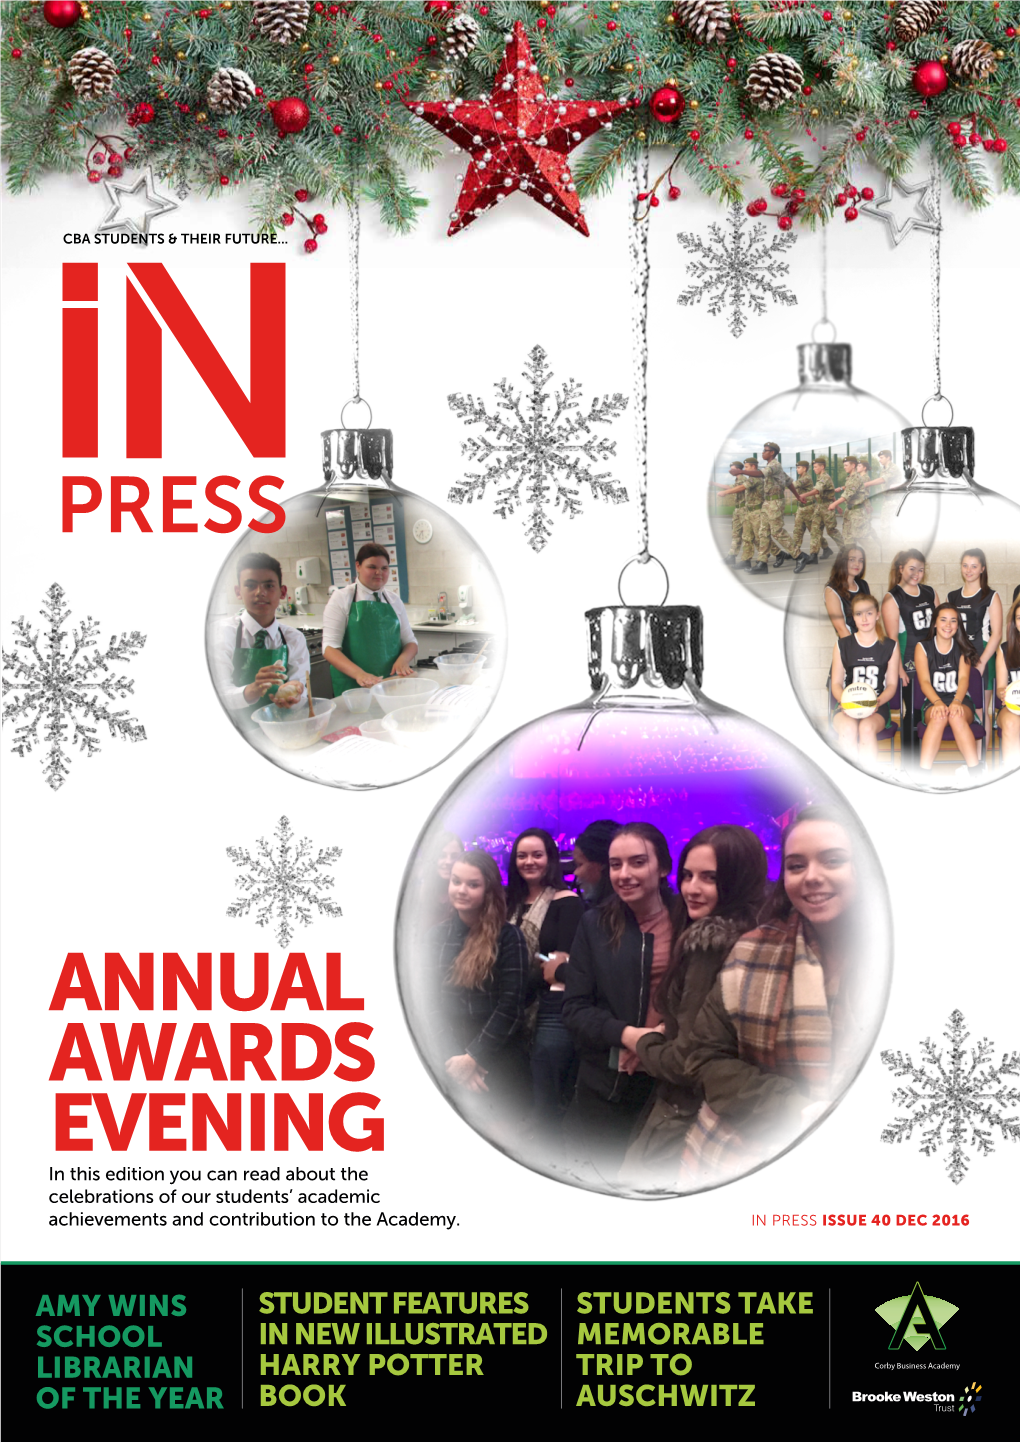 ANNUAL AWARDS EVENING in This Edition You Can Read About the Celebrations of Our Students’ Academic Achievements and Contribution to the Academy